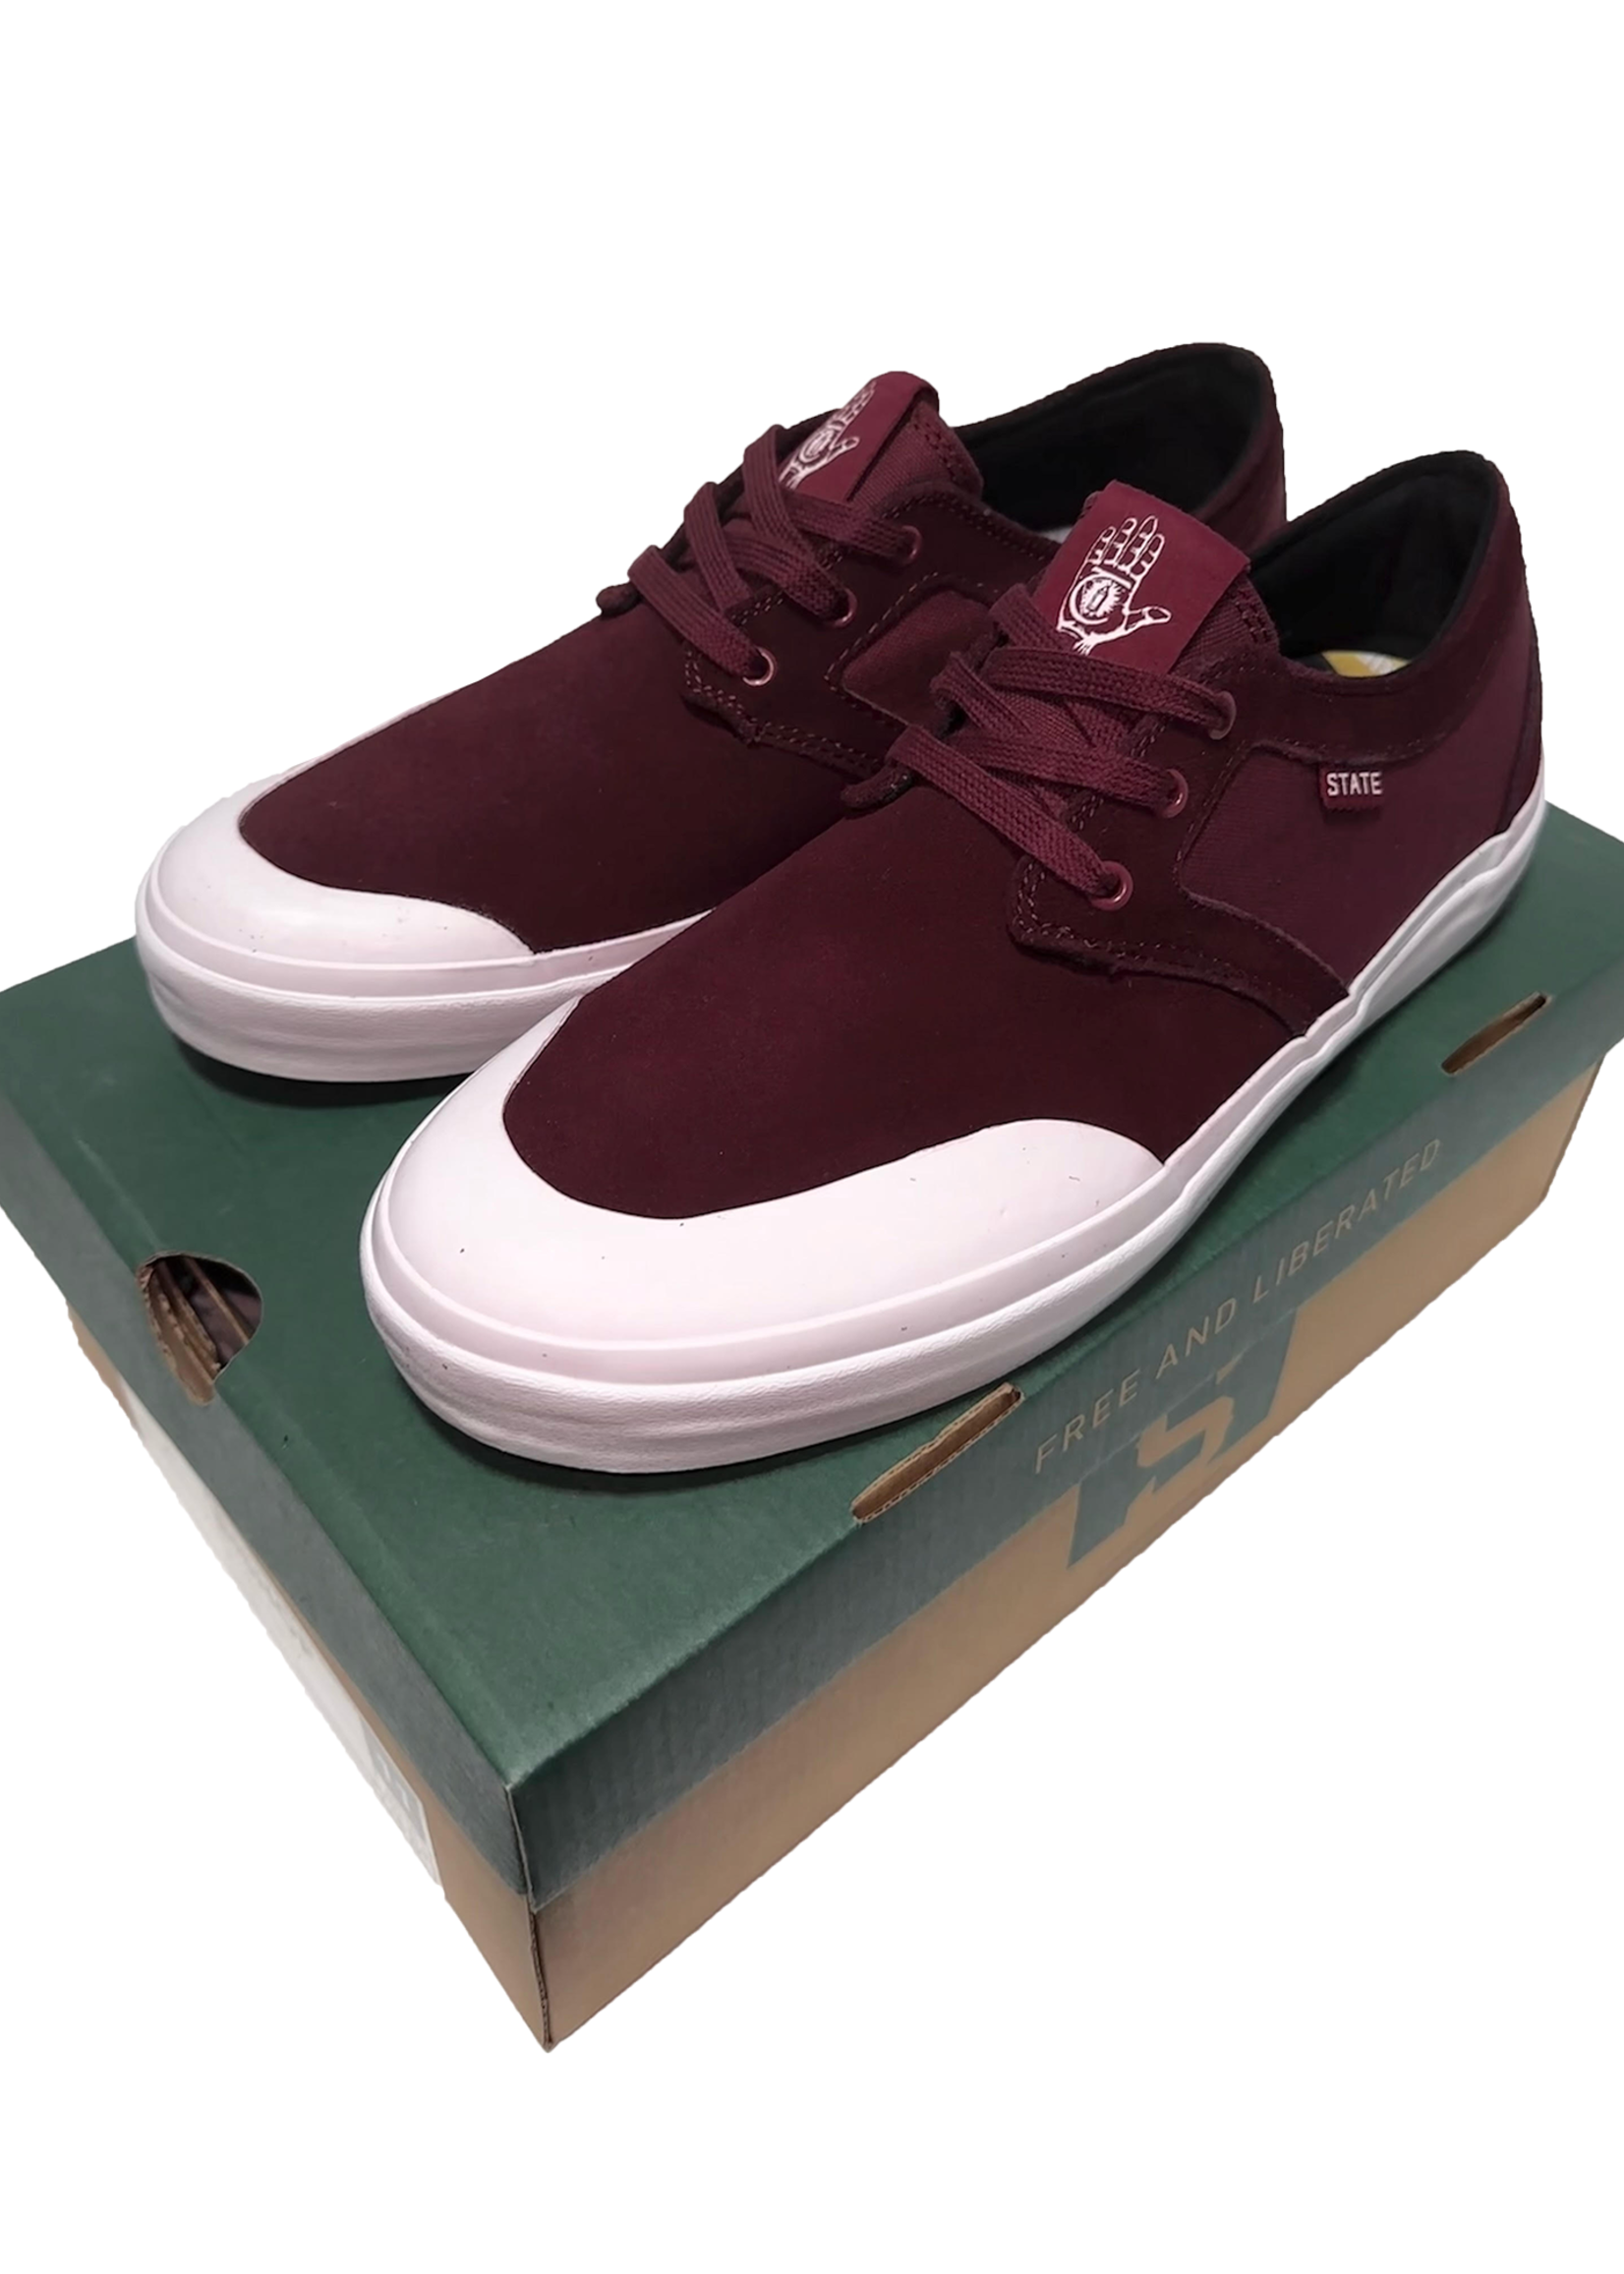 STATE FOOTWARE STATE FOOTWEAR - Bishop -THEORIES X Black Cherry Suede/Rubber Toe Size 8 USM's